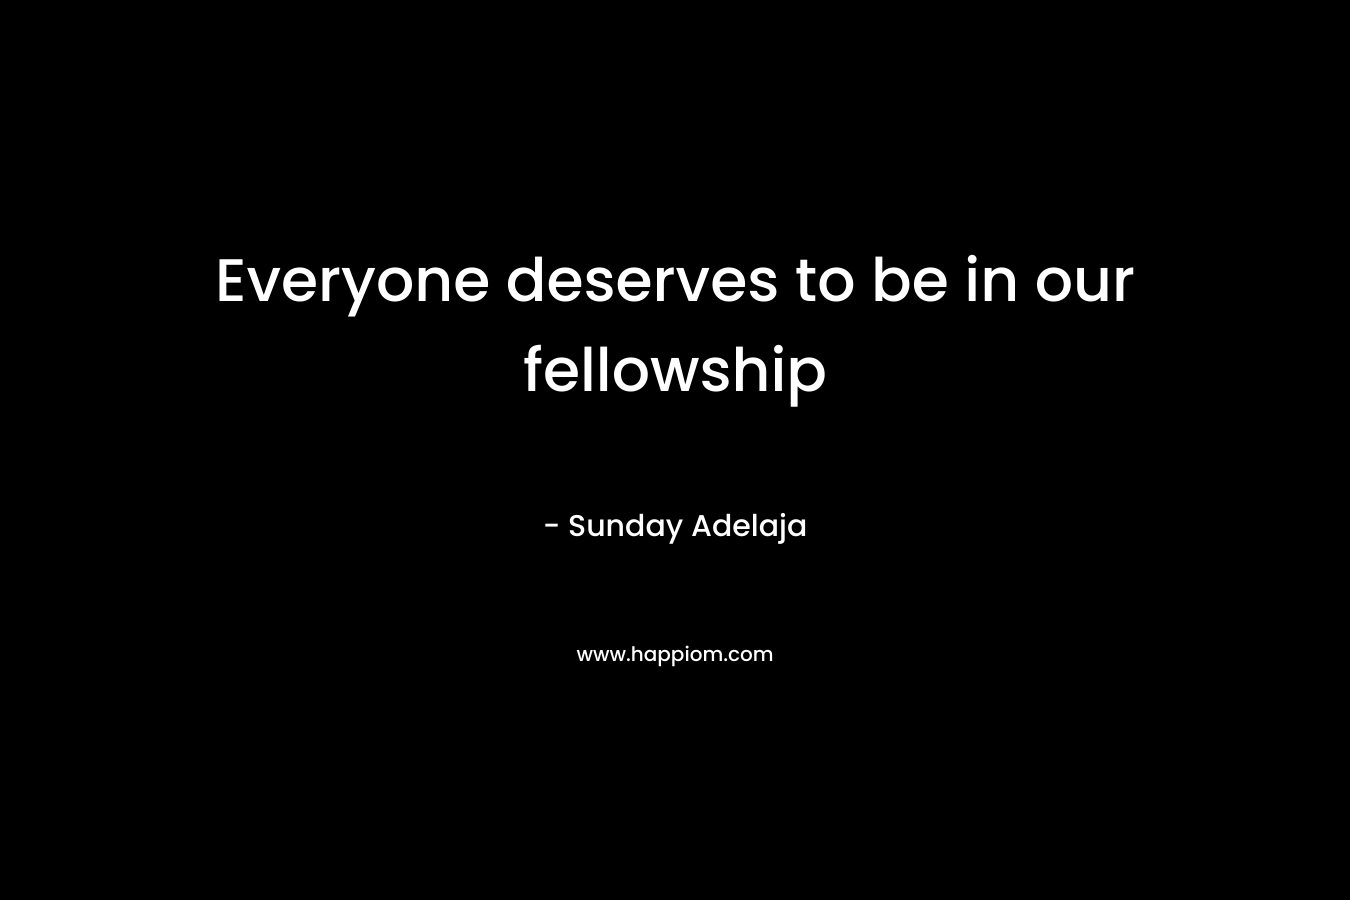 Everyone deserves to be in our fellowship